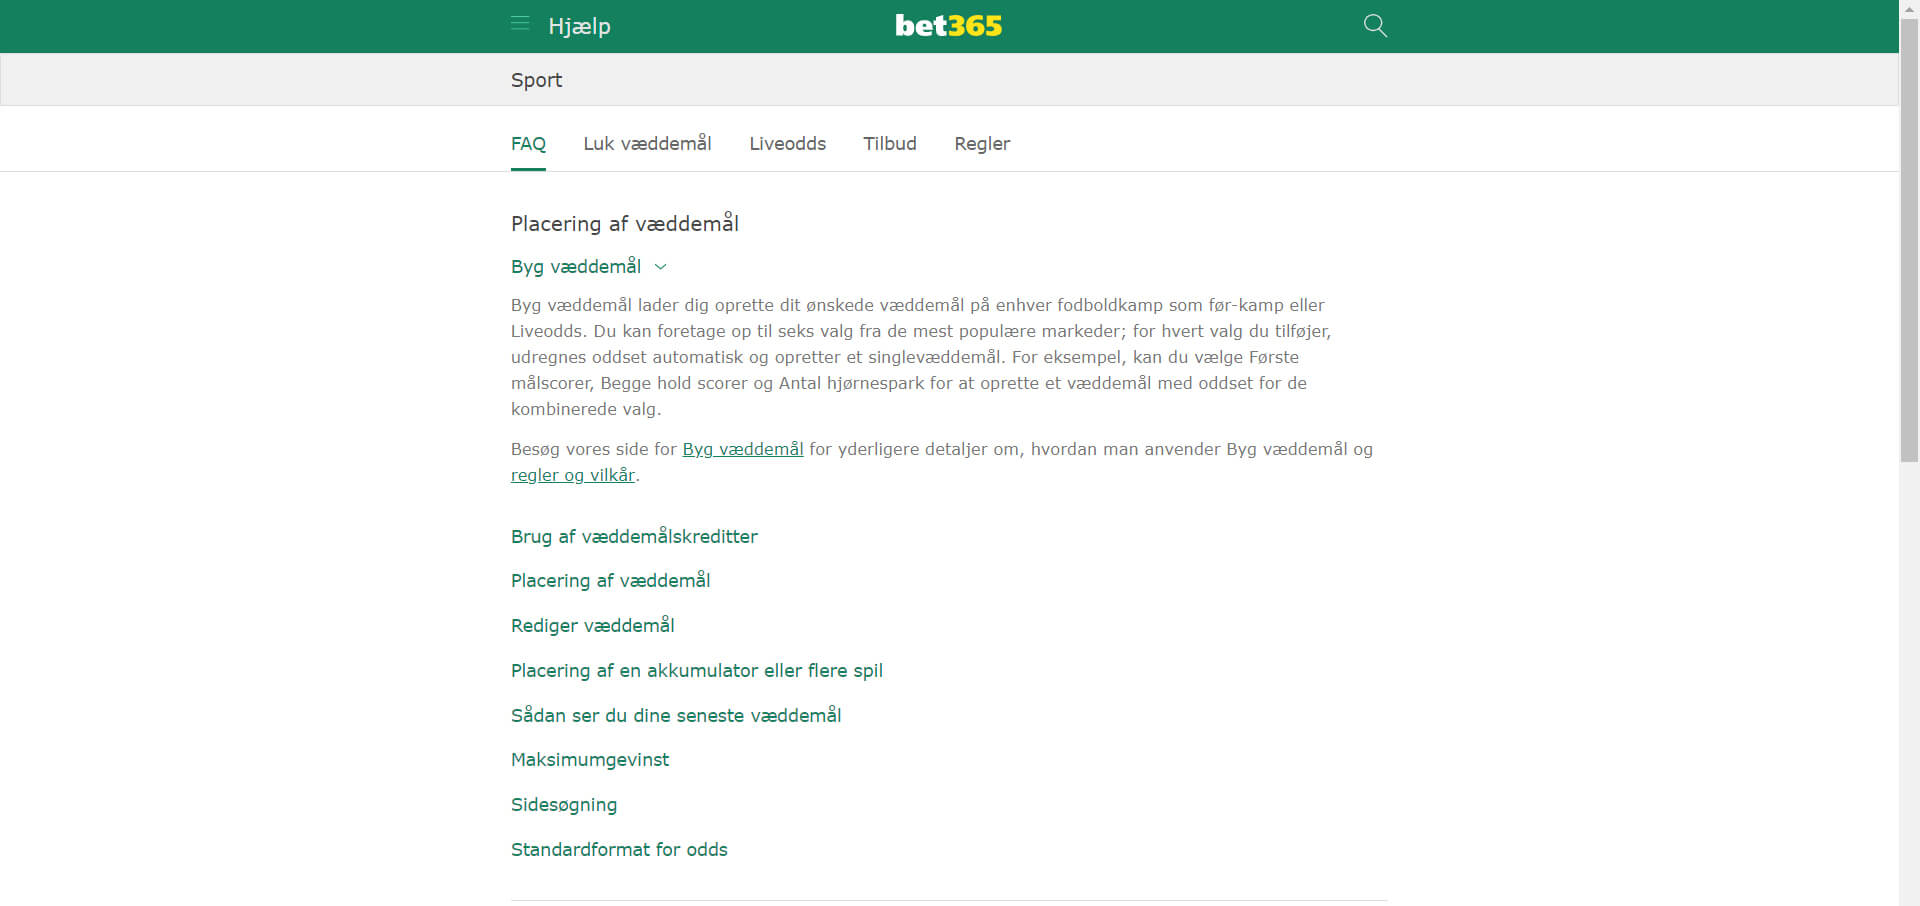 Bet365 Kundeservice